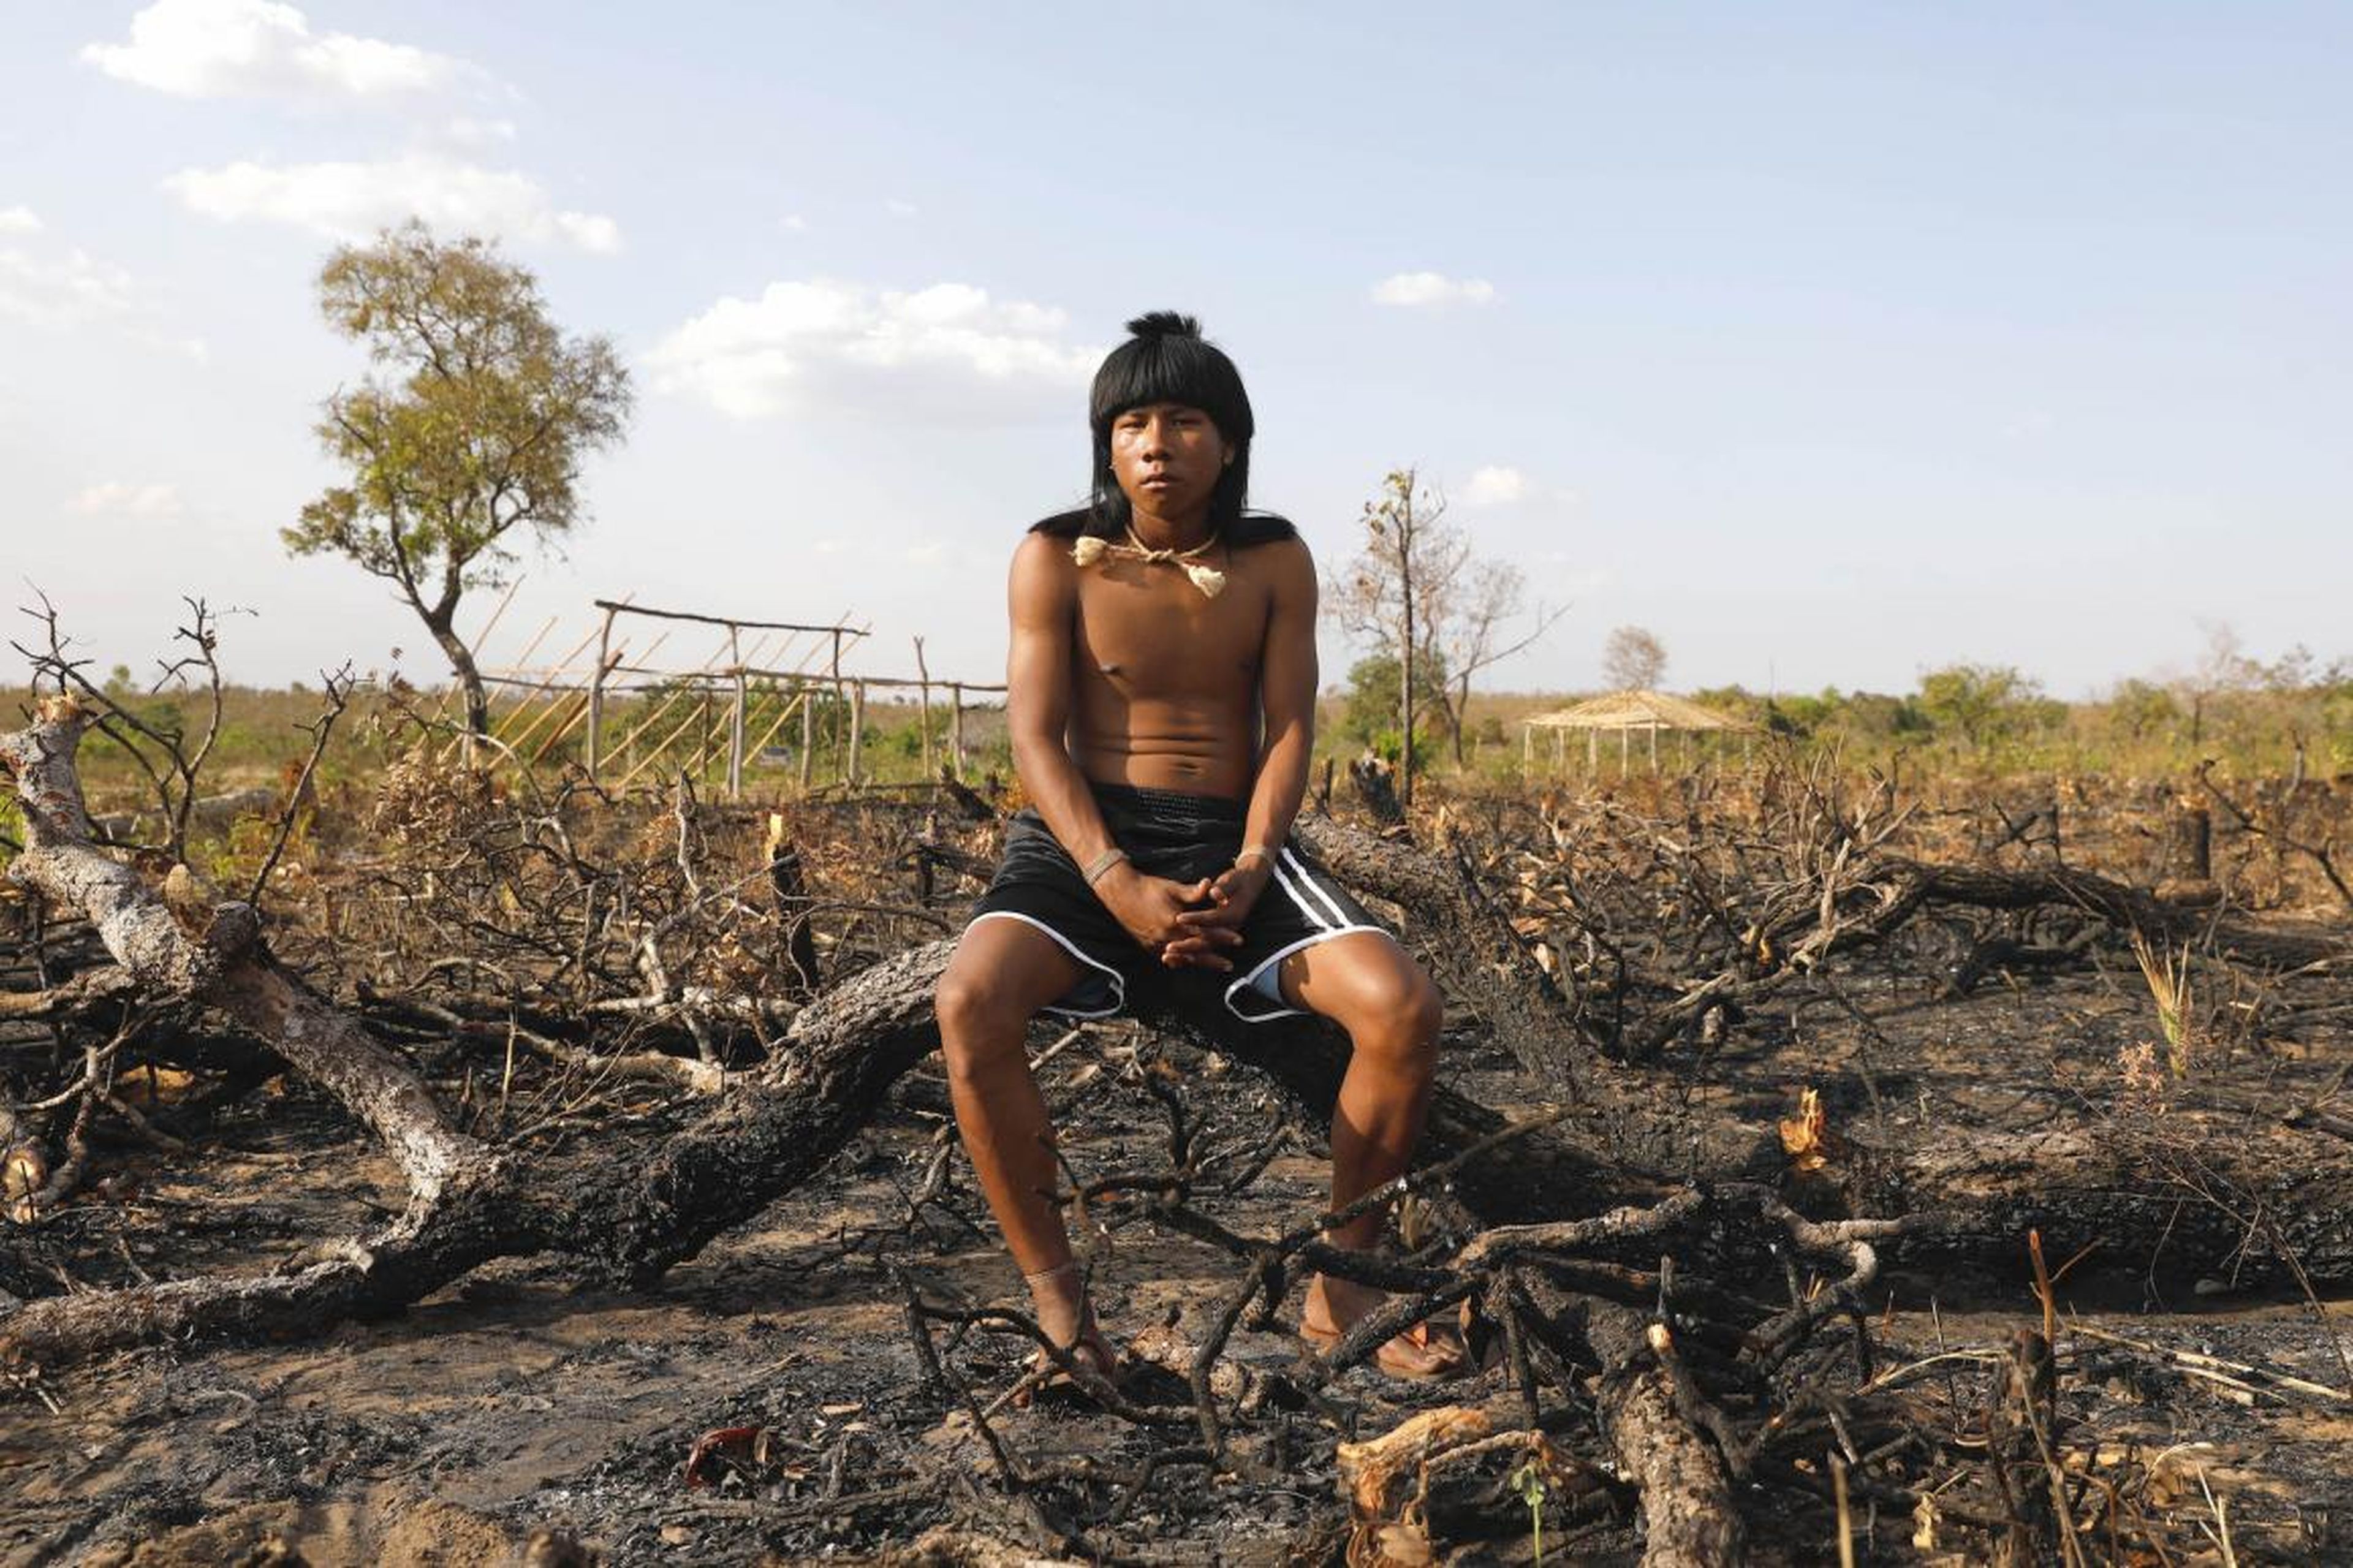 In the 16th century, when Portuguese settlers arrived in Brazil, there were about 3 million native people living there. Now there are only about 1 million. Indigenous peoples make up 1% of Brazil's population. Here, an indigenous